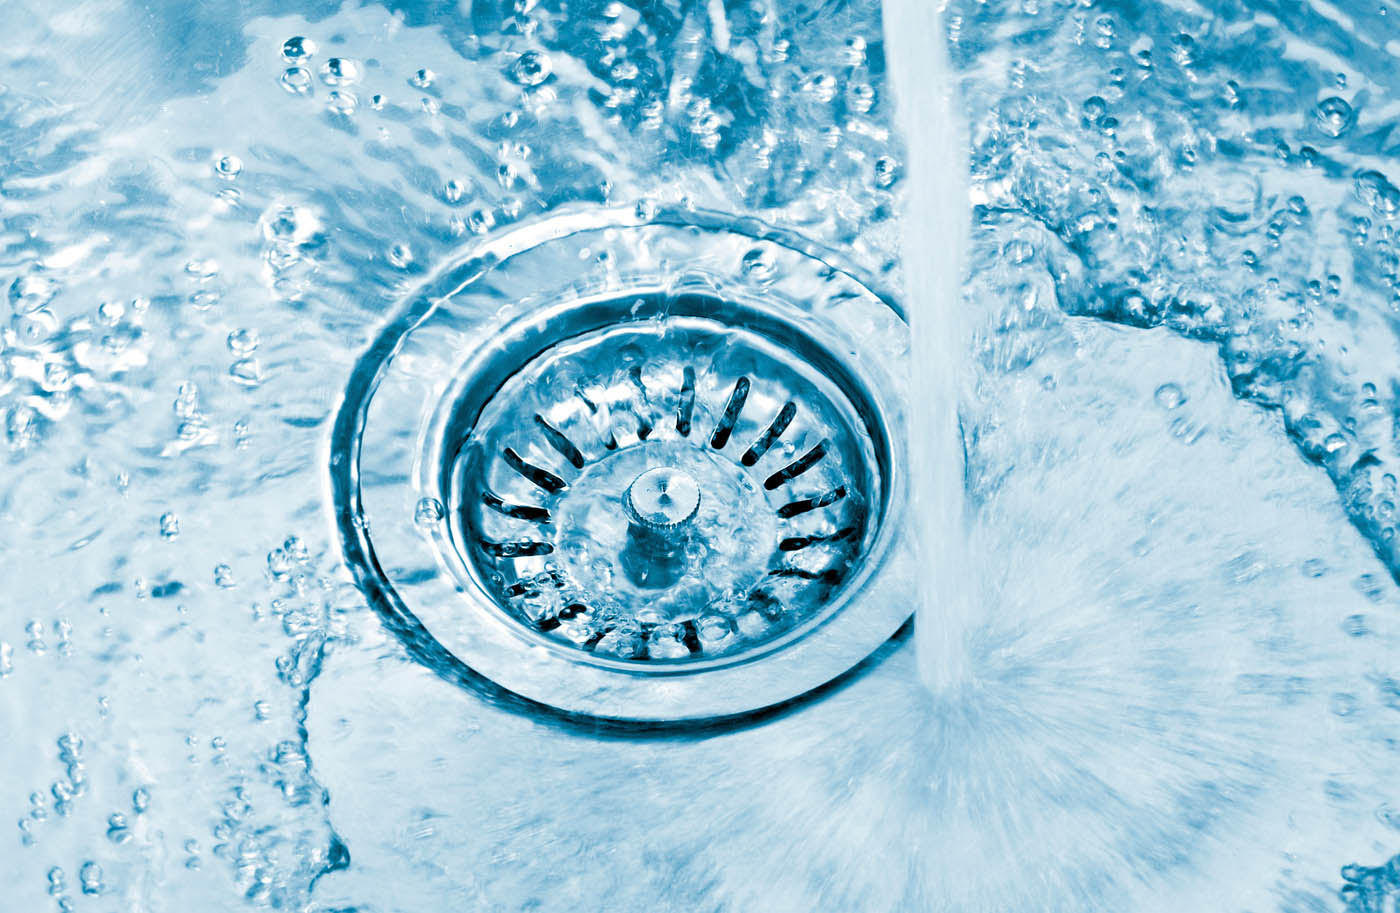 WyattWorks Plumbing drain cleaning services and sewer services.